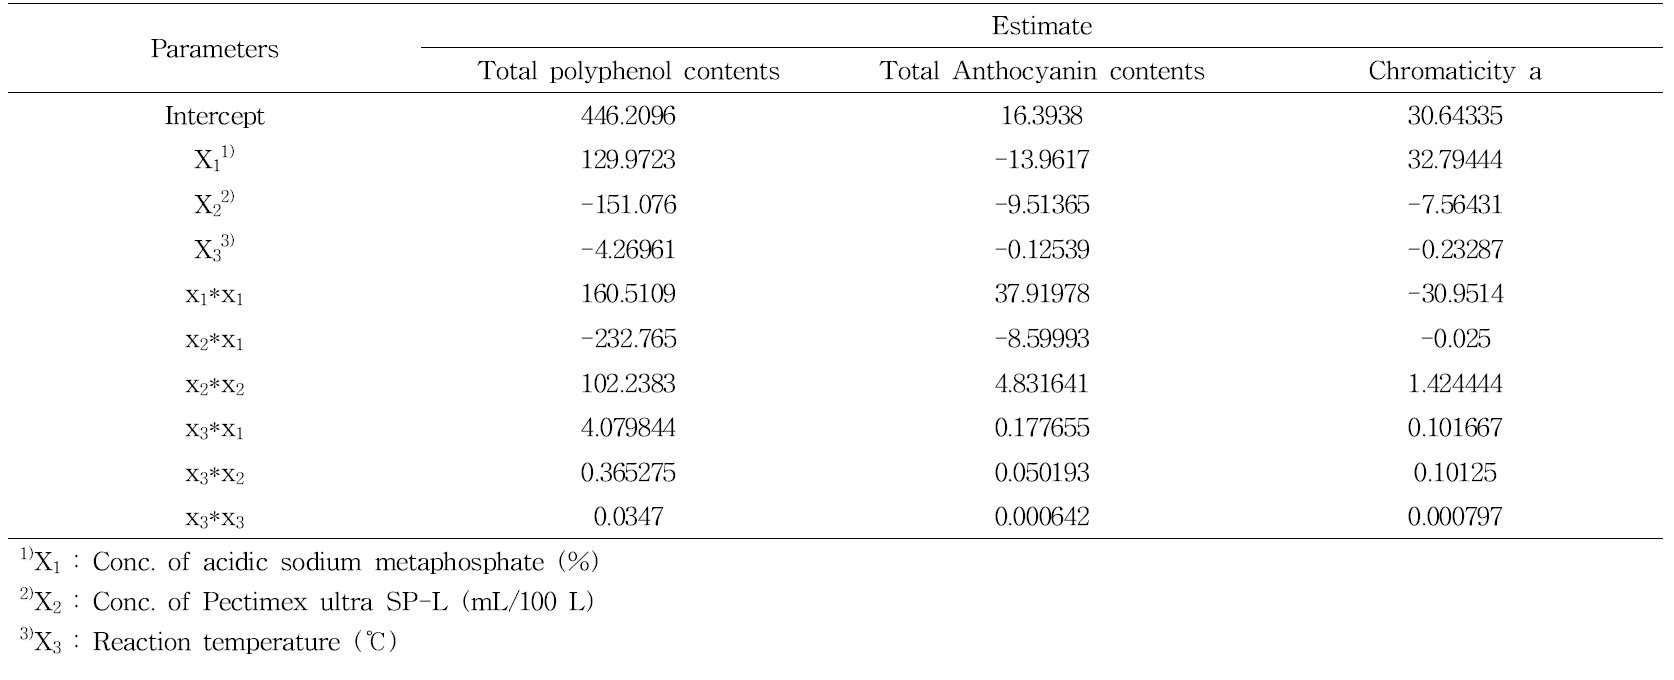 Regression coefficients of second degree polynomials for total polyphenol contents, total anthocyanin contents and chromaticity of acidic sodium metaphosphate treatment and Pectinex ultra SP-L enzyme treatment from concentrated strawberry puree.